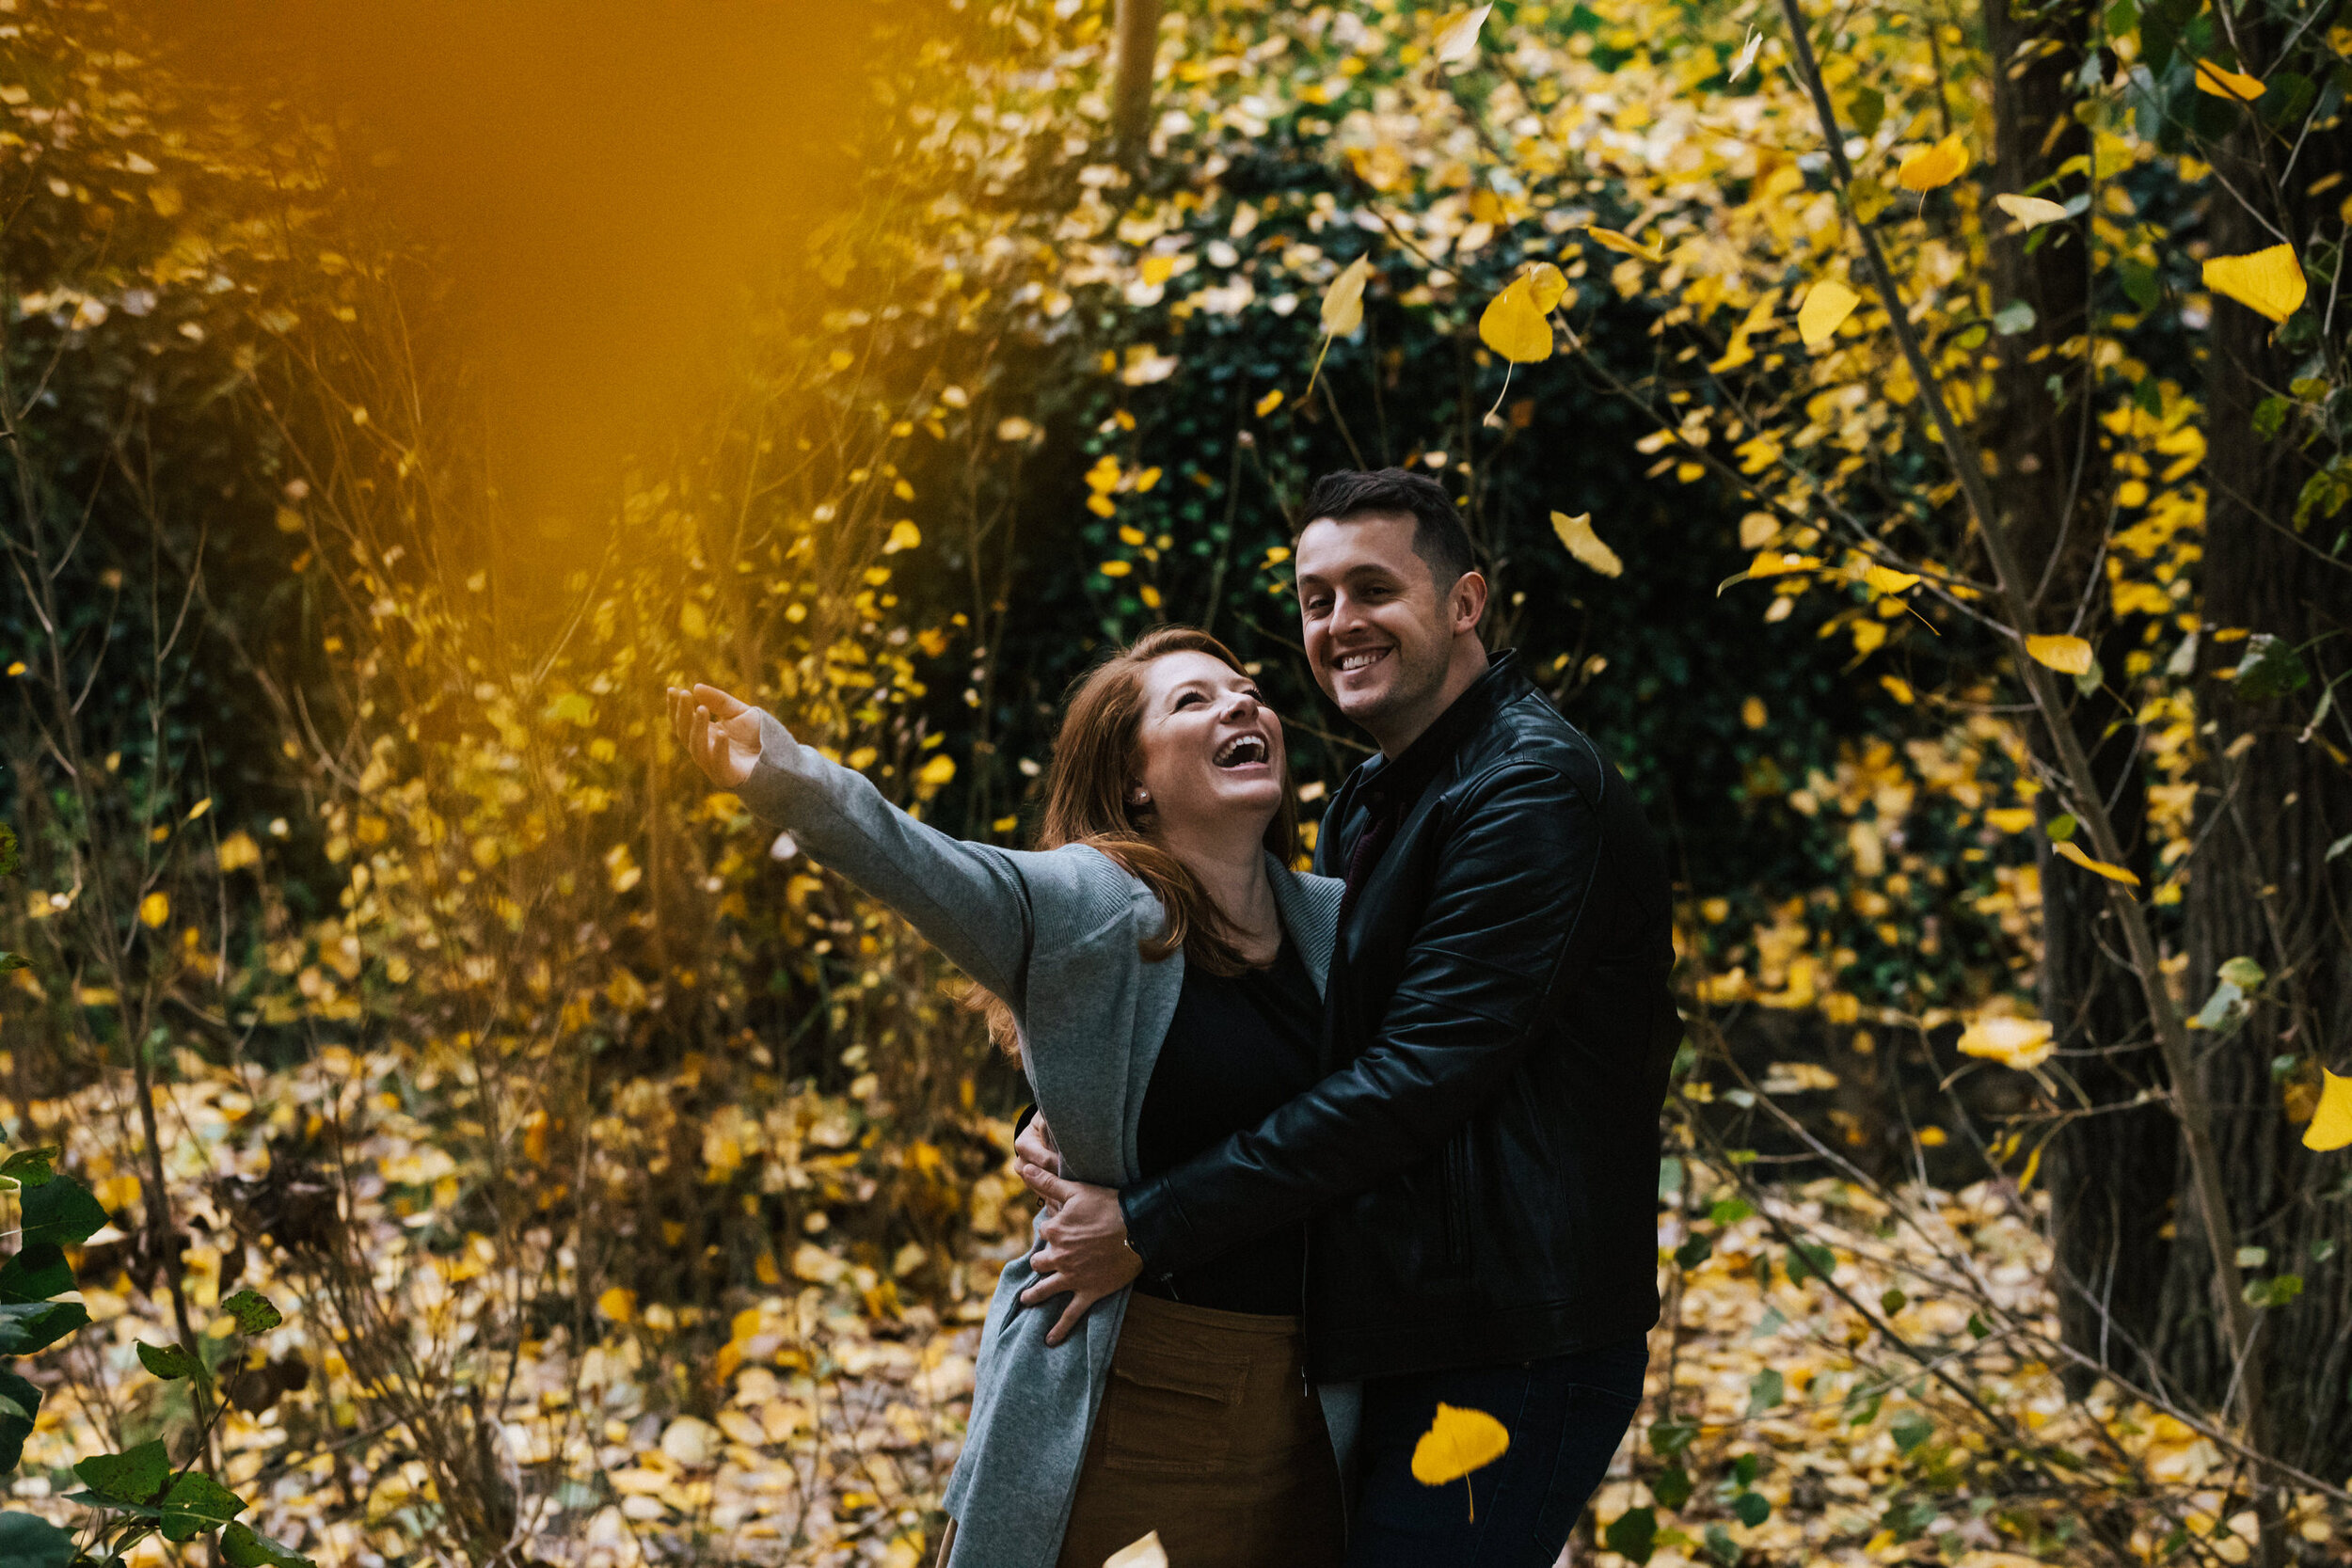 Wintery Autumn Adelaide Hills Engagement Session 16.JPG